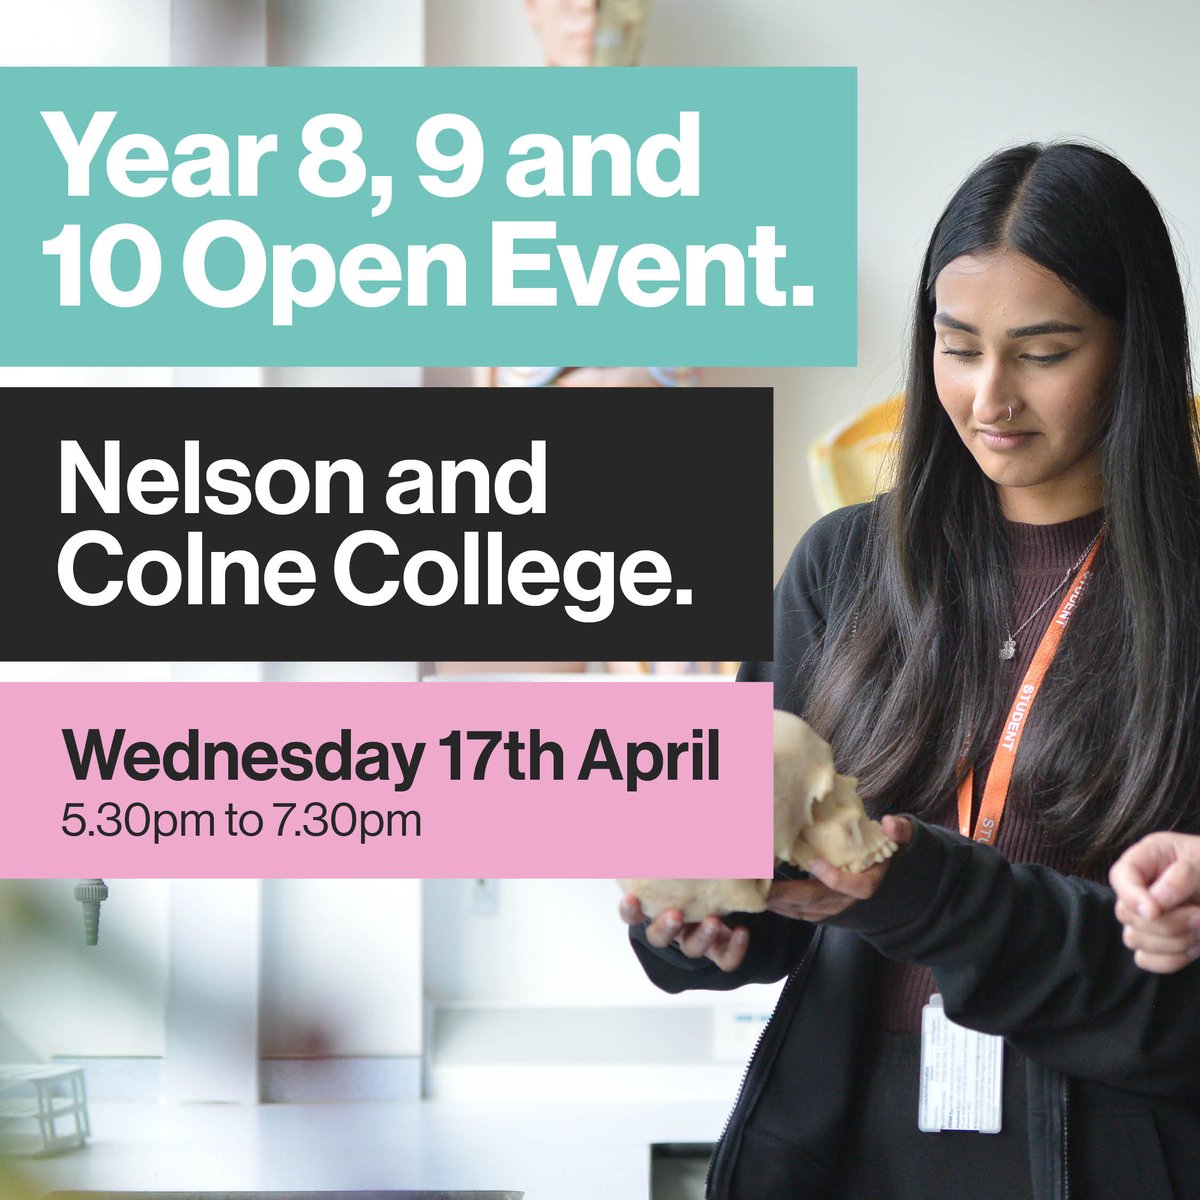 Our Year 8, 9 and 10 Open Event is TONIGHT!🌟 If you're looking to find out about the wide range of options available to you at Nelson and Colne College – from Ofsted outstanding tutors to our impressive campus, make sure you come along tonight between 5.30pm - 7.30pm!🙌